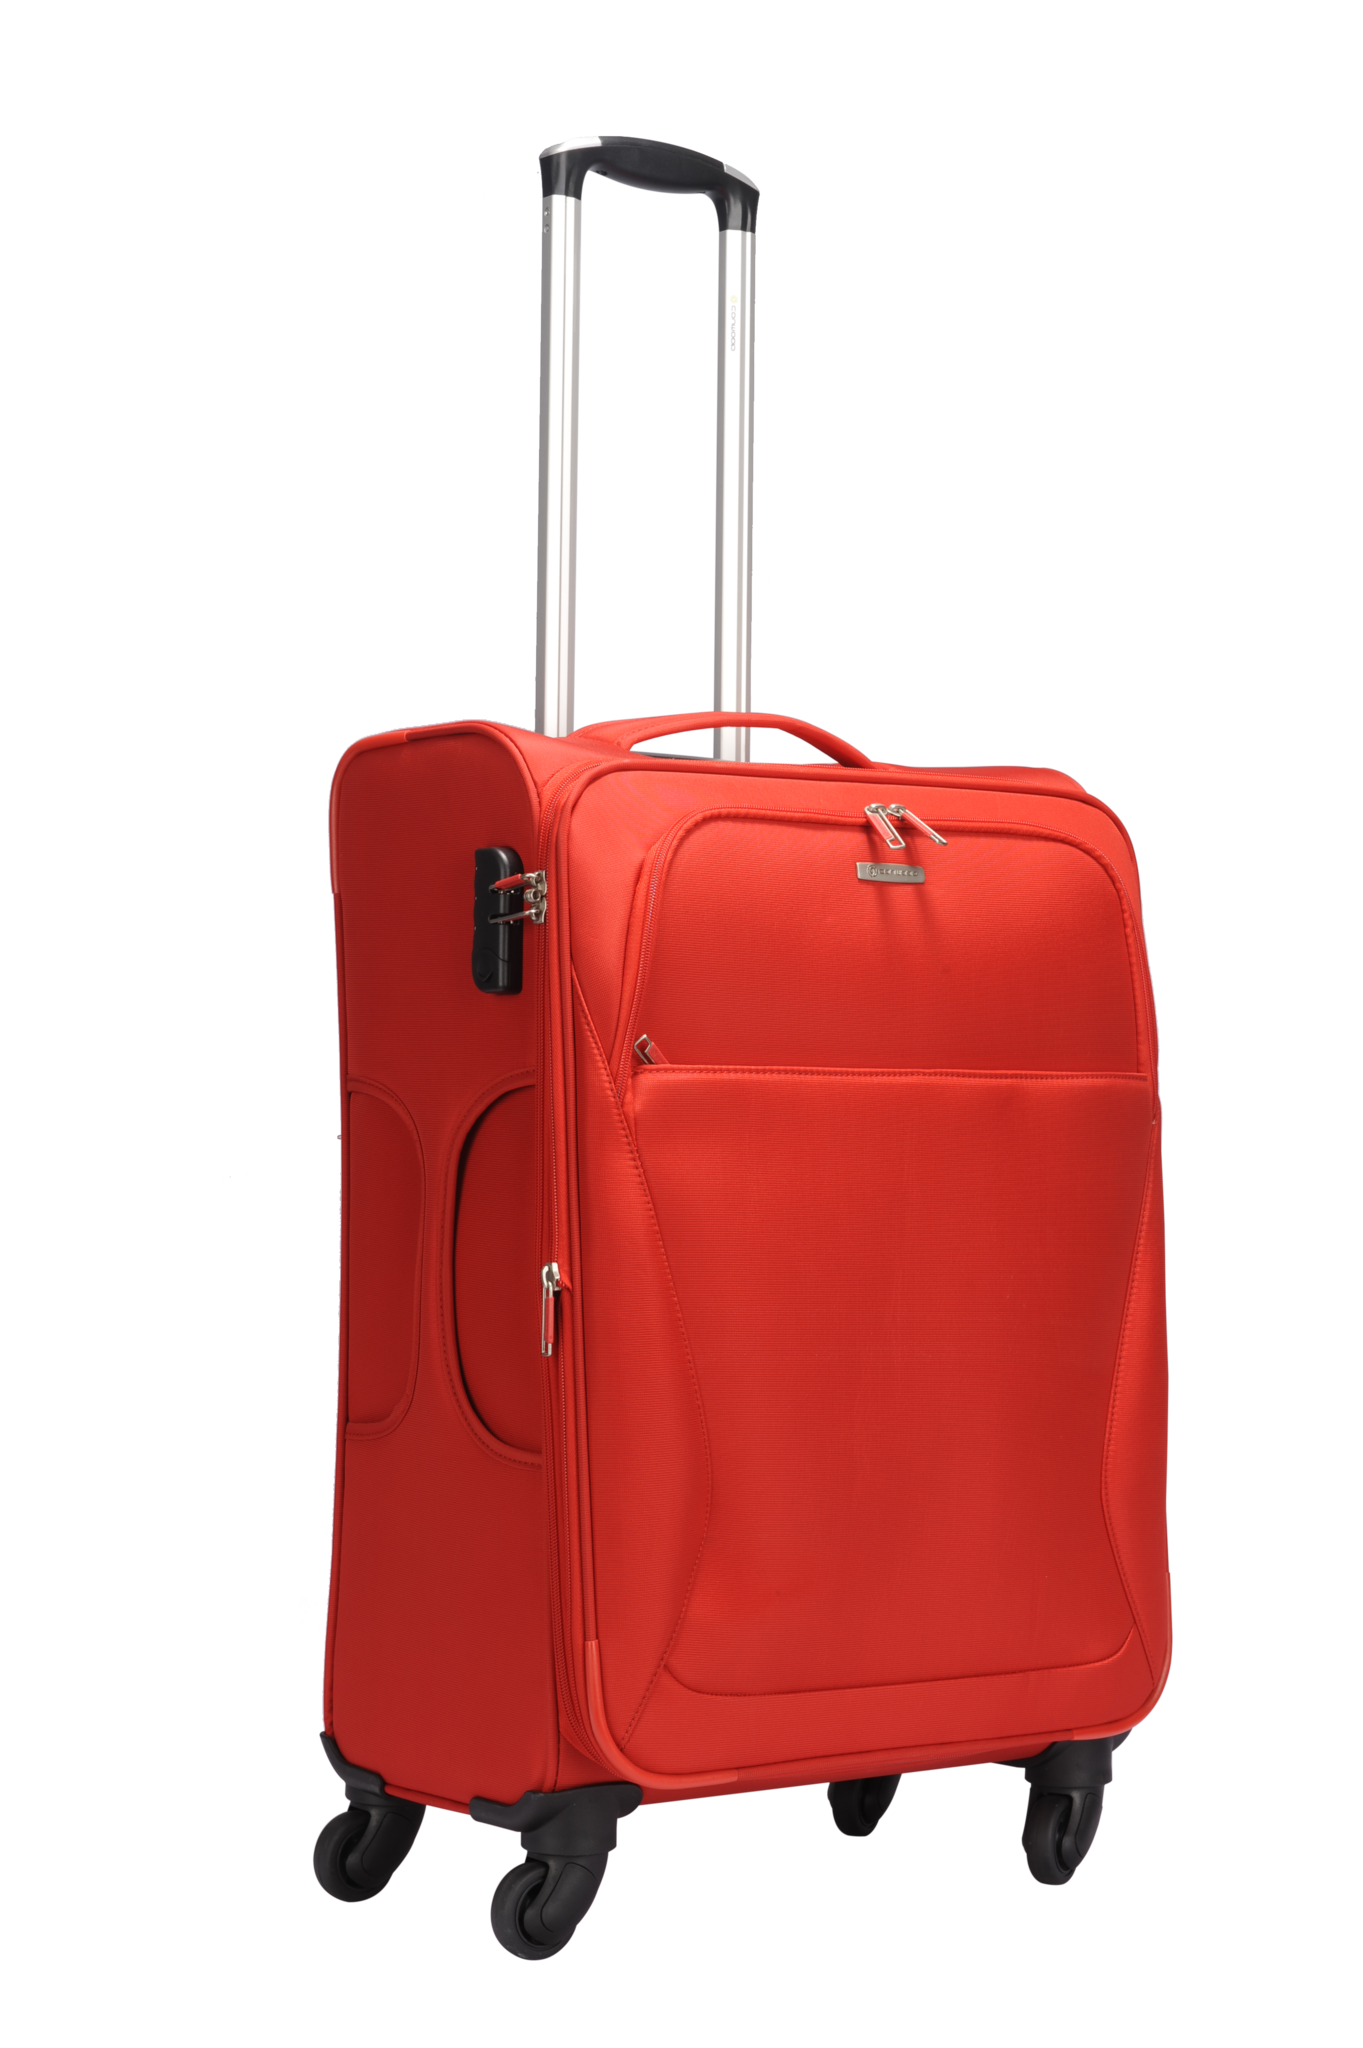 luggage clipart red suitcase